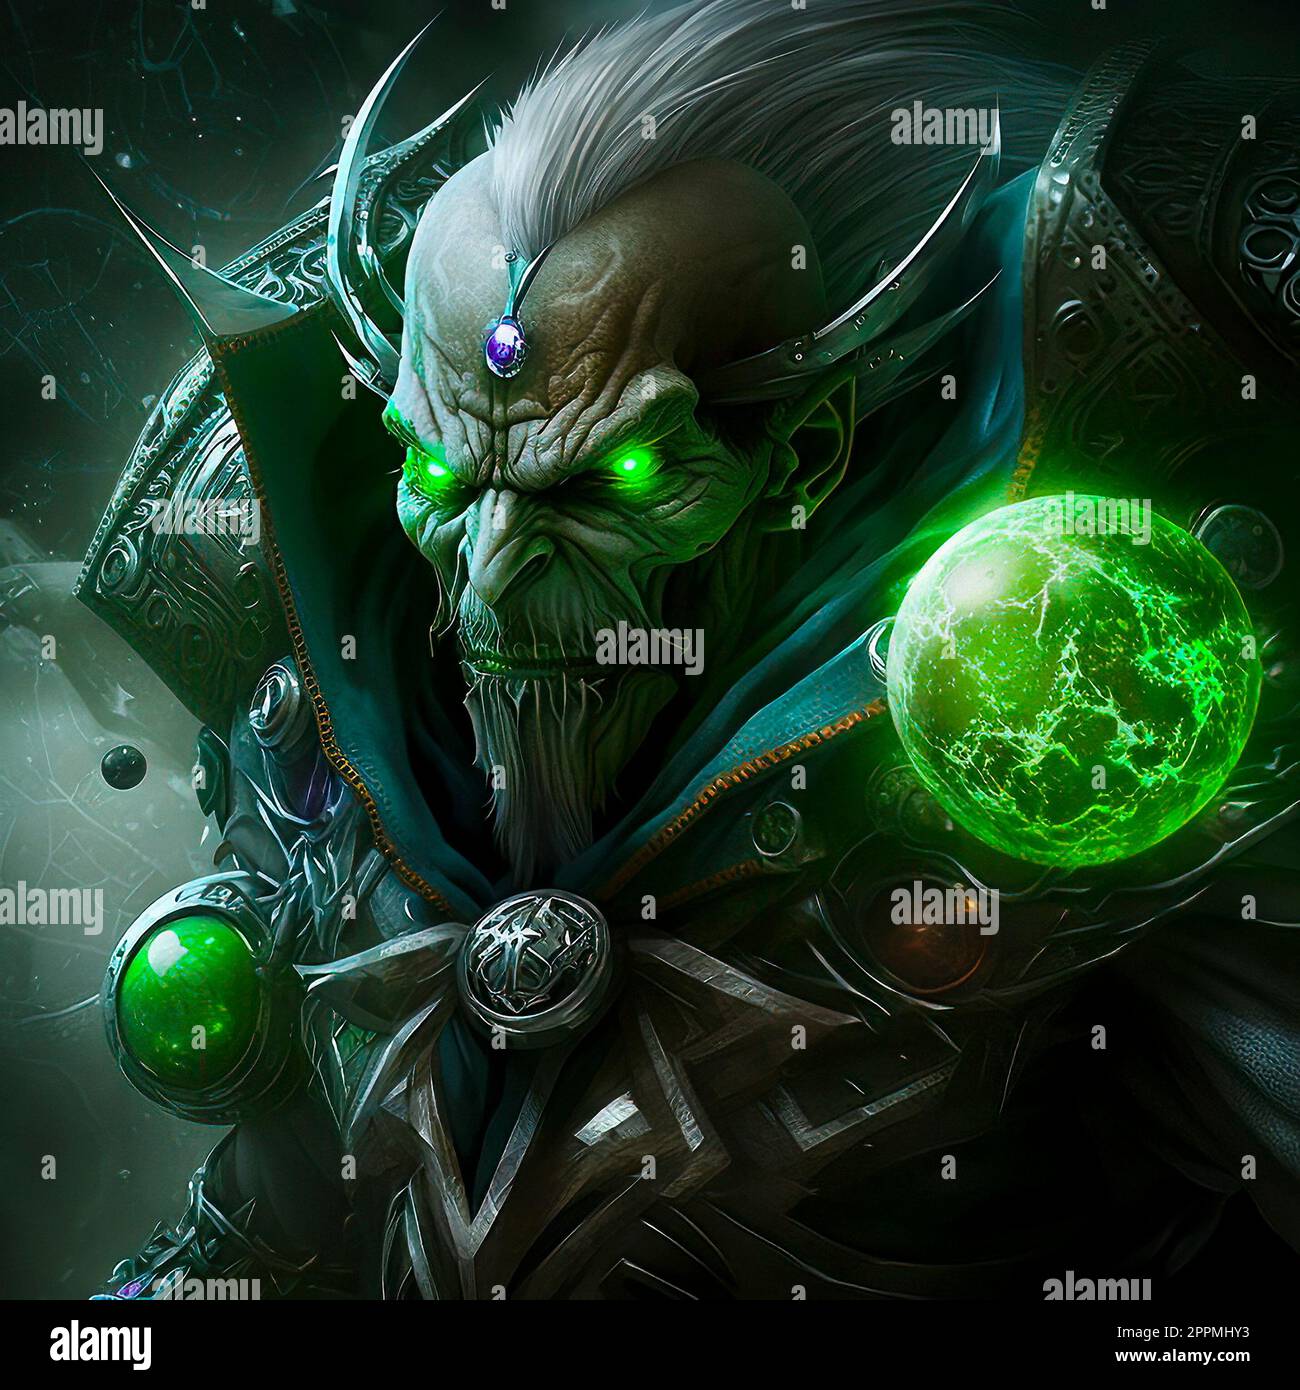 A Dark Priest or Necromancer with Piercing Green Eyes holding a Magical Green Glowing Ball in a Dimly Lit Chamber, Its Pulsing Energy Casting an Eerie Light on their Face and the Surrounding Area Stock Photo